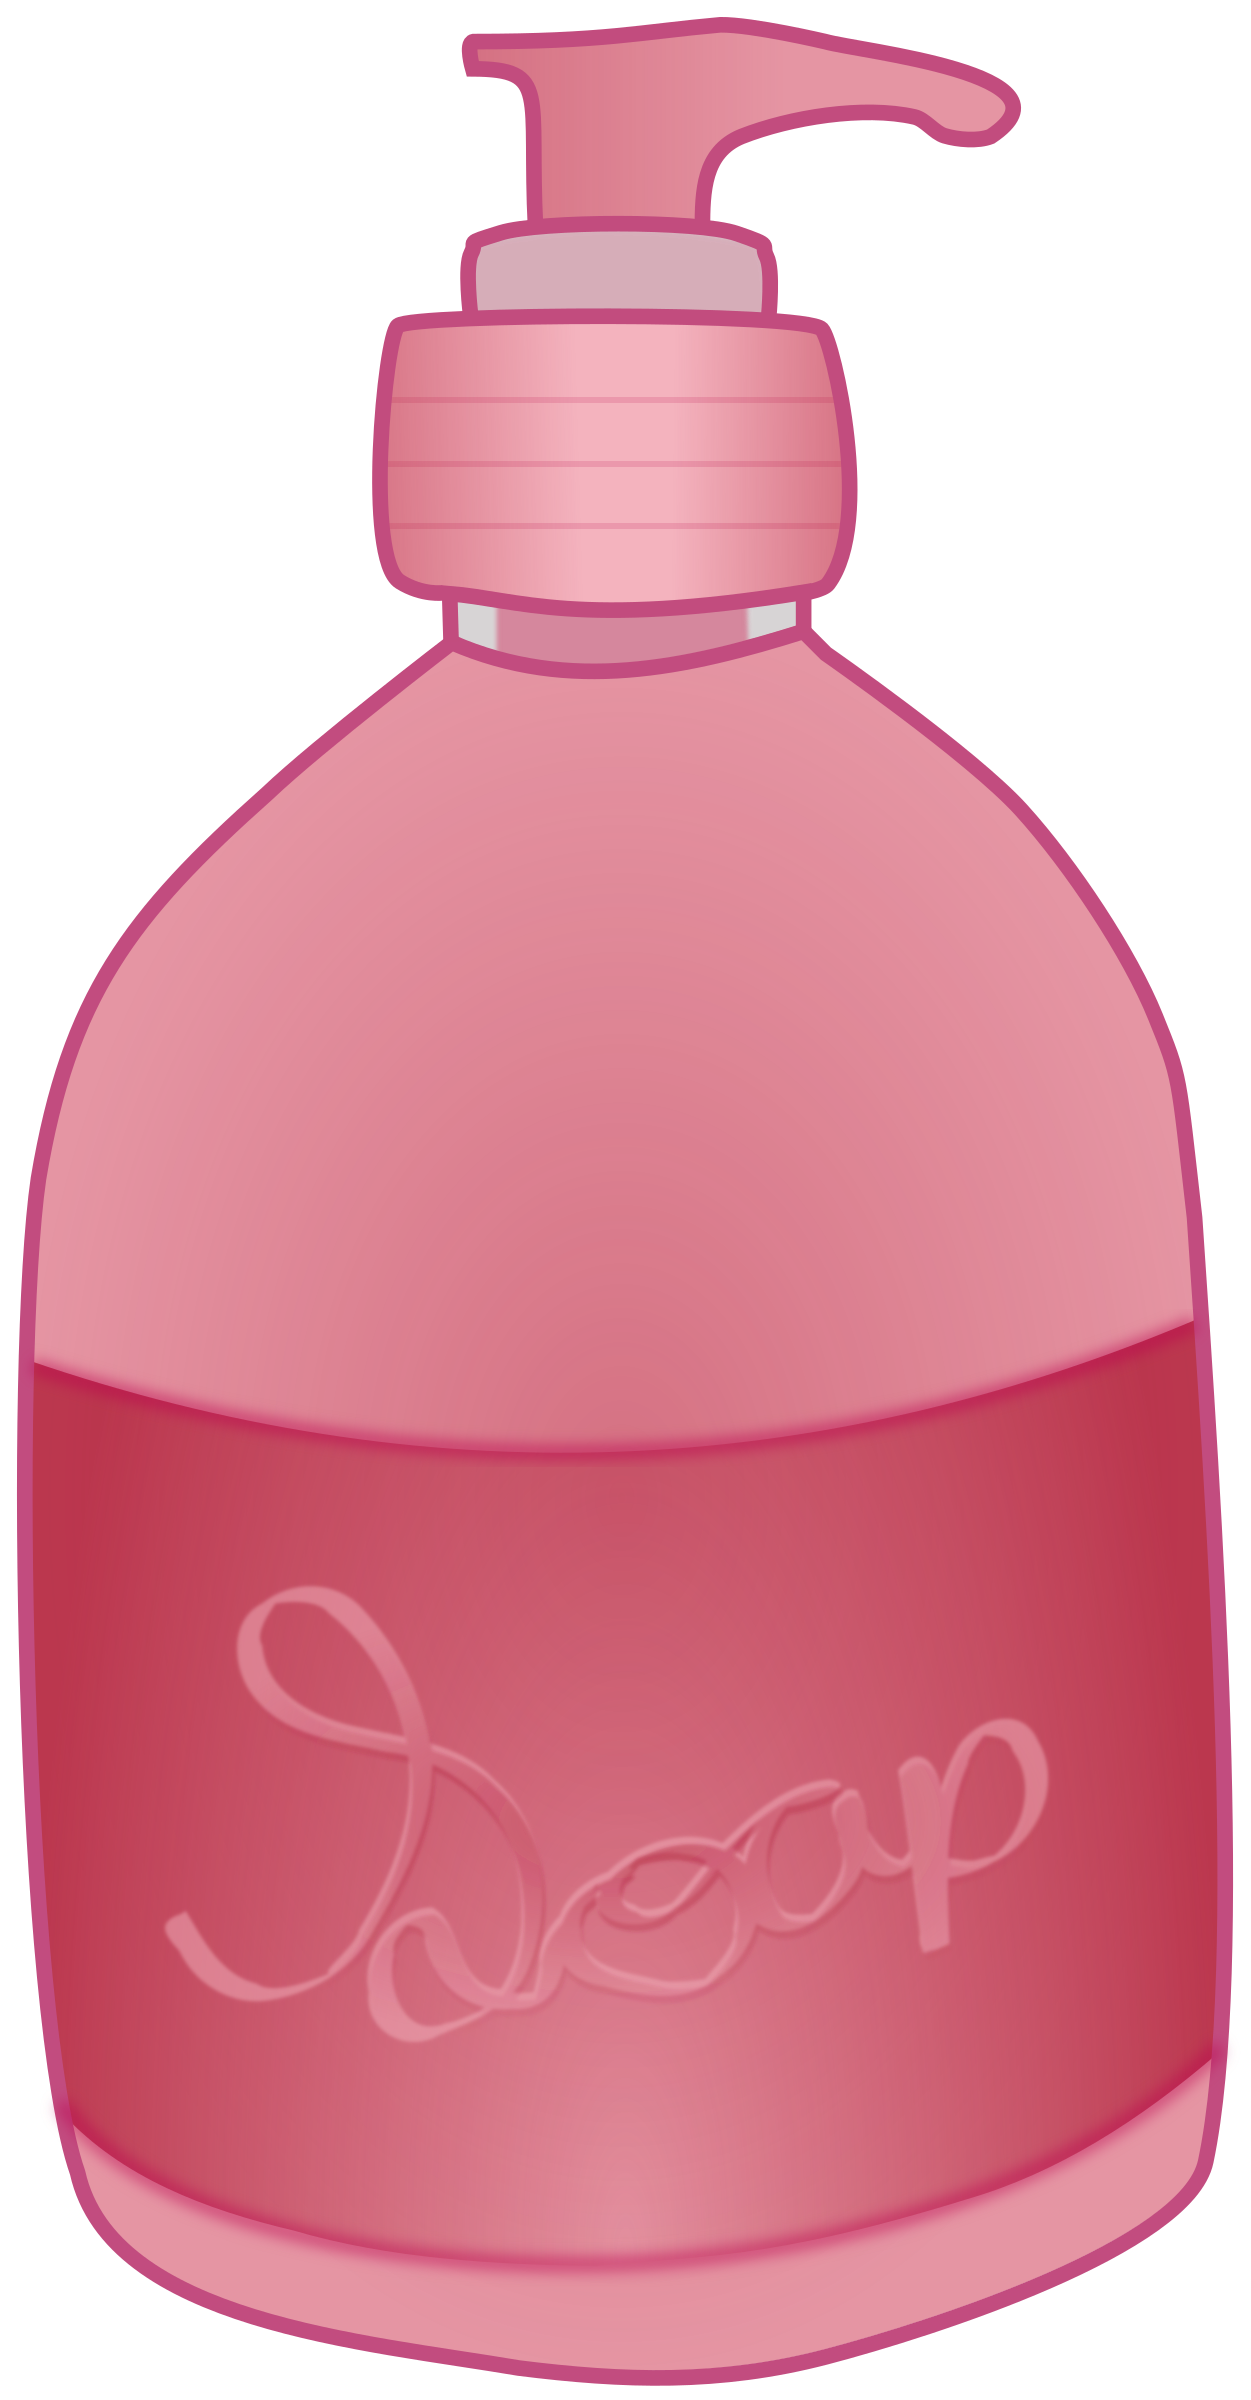 Dial Hand Soap Clipart